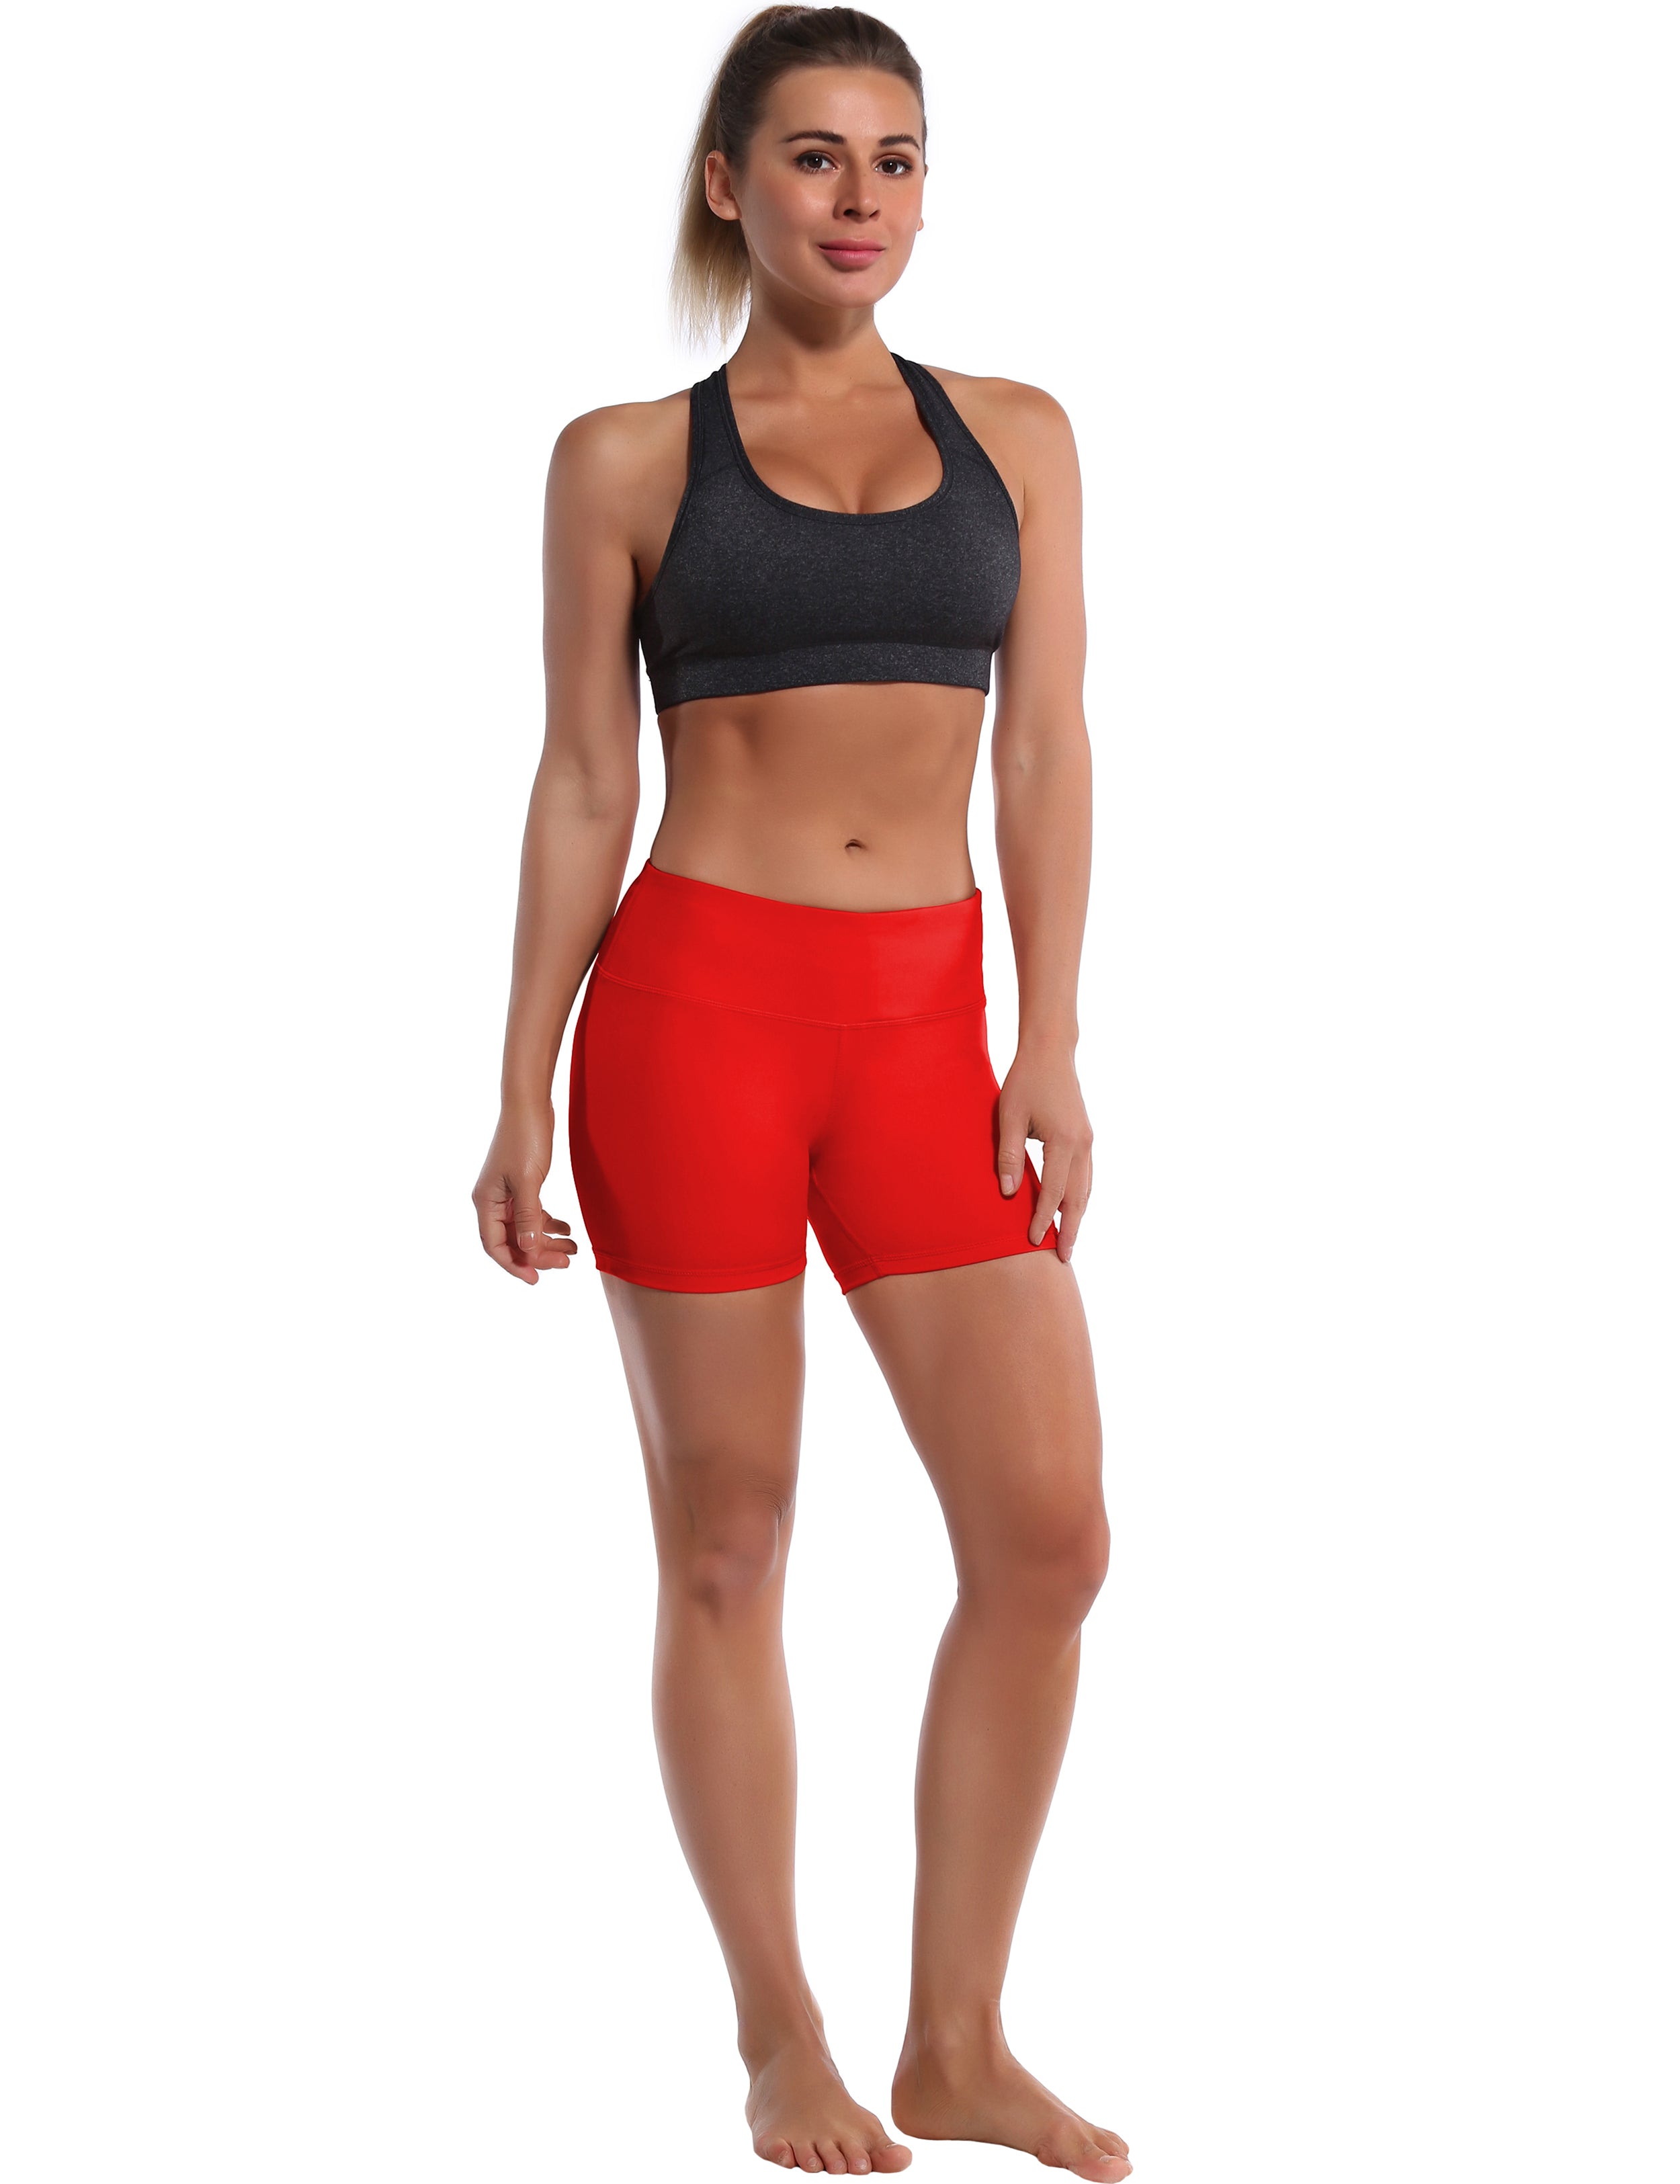 4" Yoga Shorts scarlet Sleek, soft, smooth and totally comfortable: our newest style is here. Softest-ever fabric High elasticity High density 4-way stretch Fabric doesn't attract lint easily No see-through Moisture-wicking Machine wash 75% Nylon, 25% Spandex